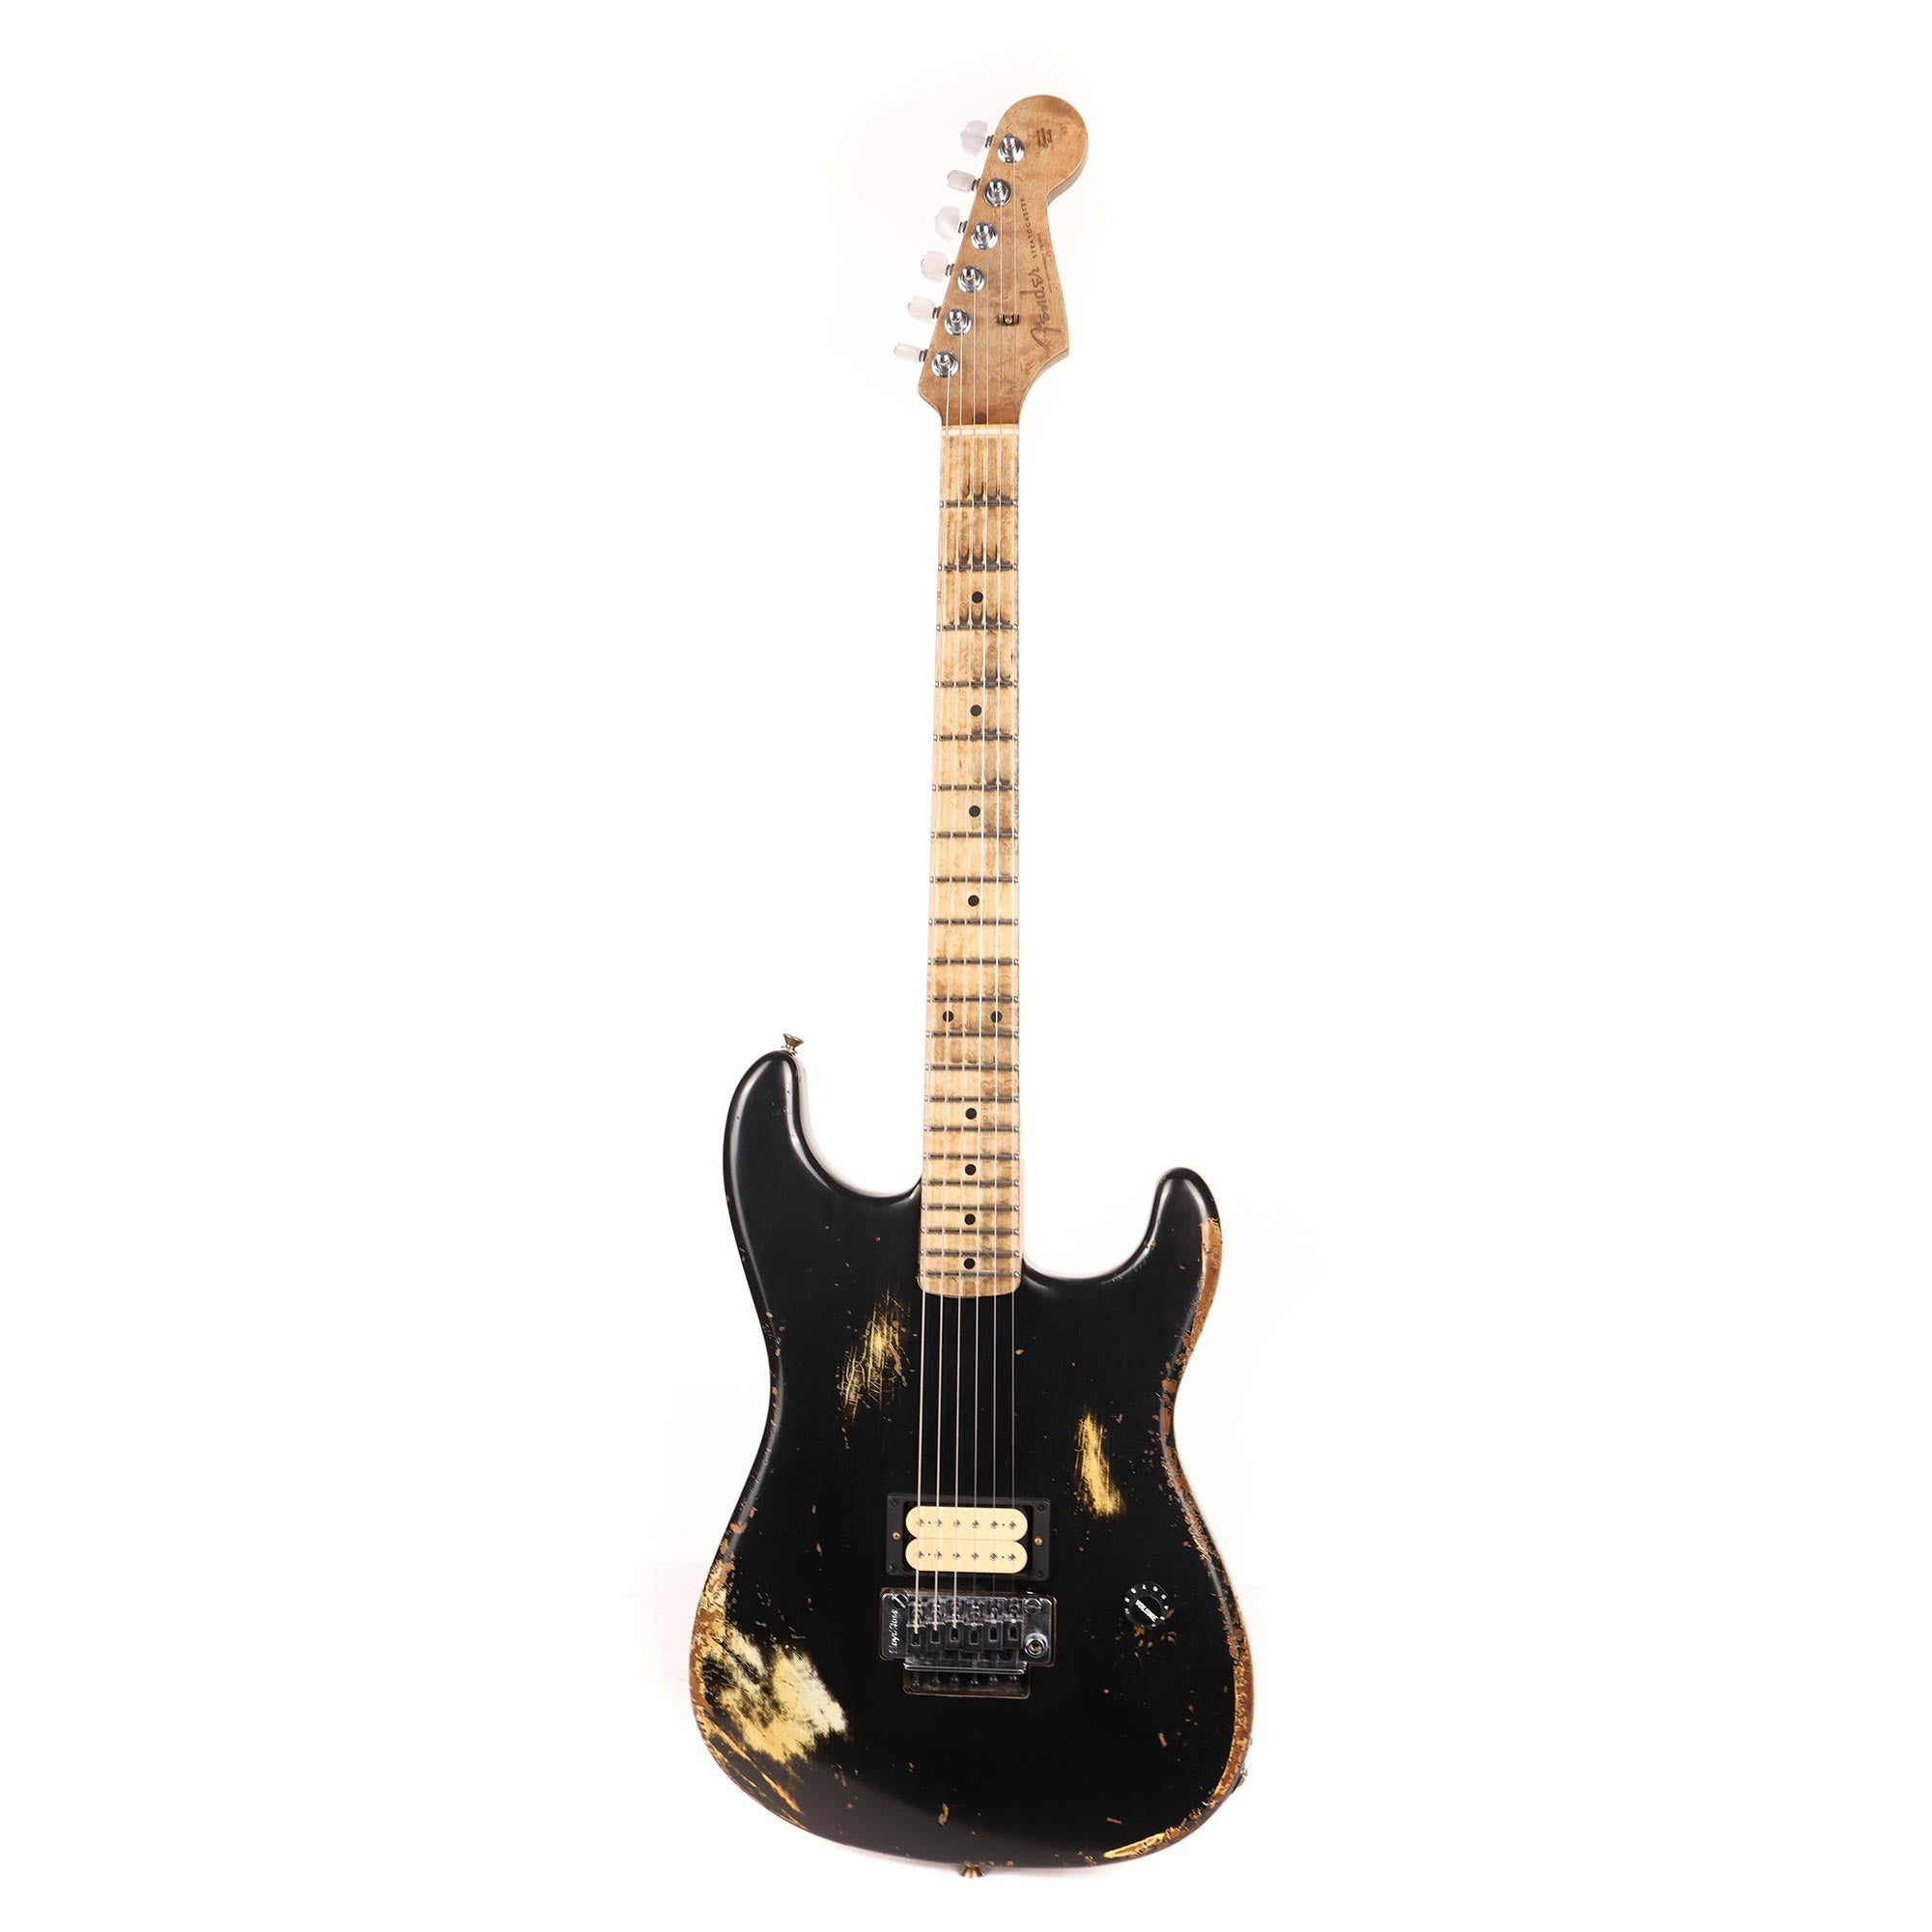 Fender Custom Shop ZF Stratocaster Heavy Relic Black | The Music Zoo